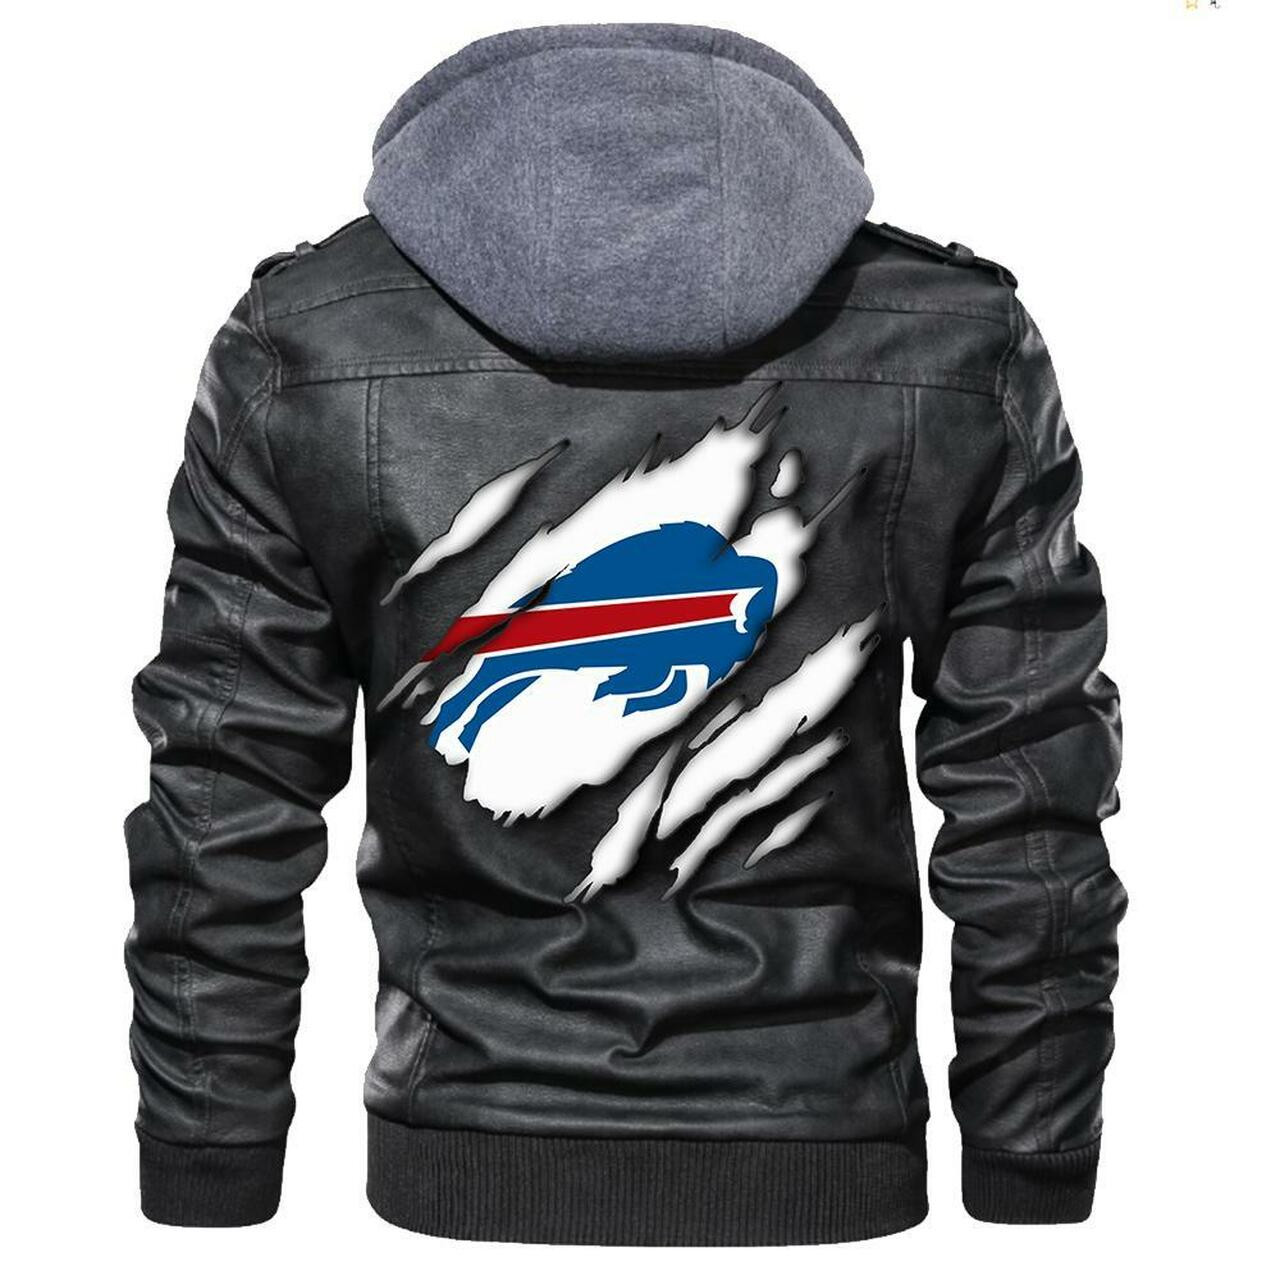 Our store has all of the latest leather jacket 141